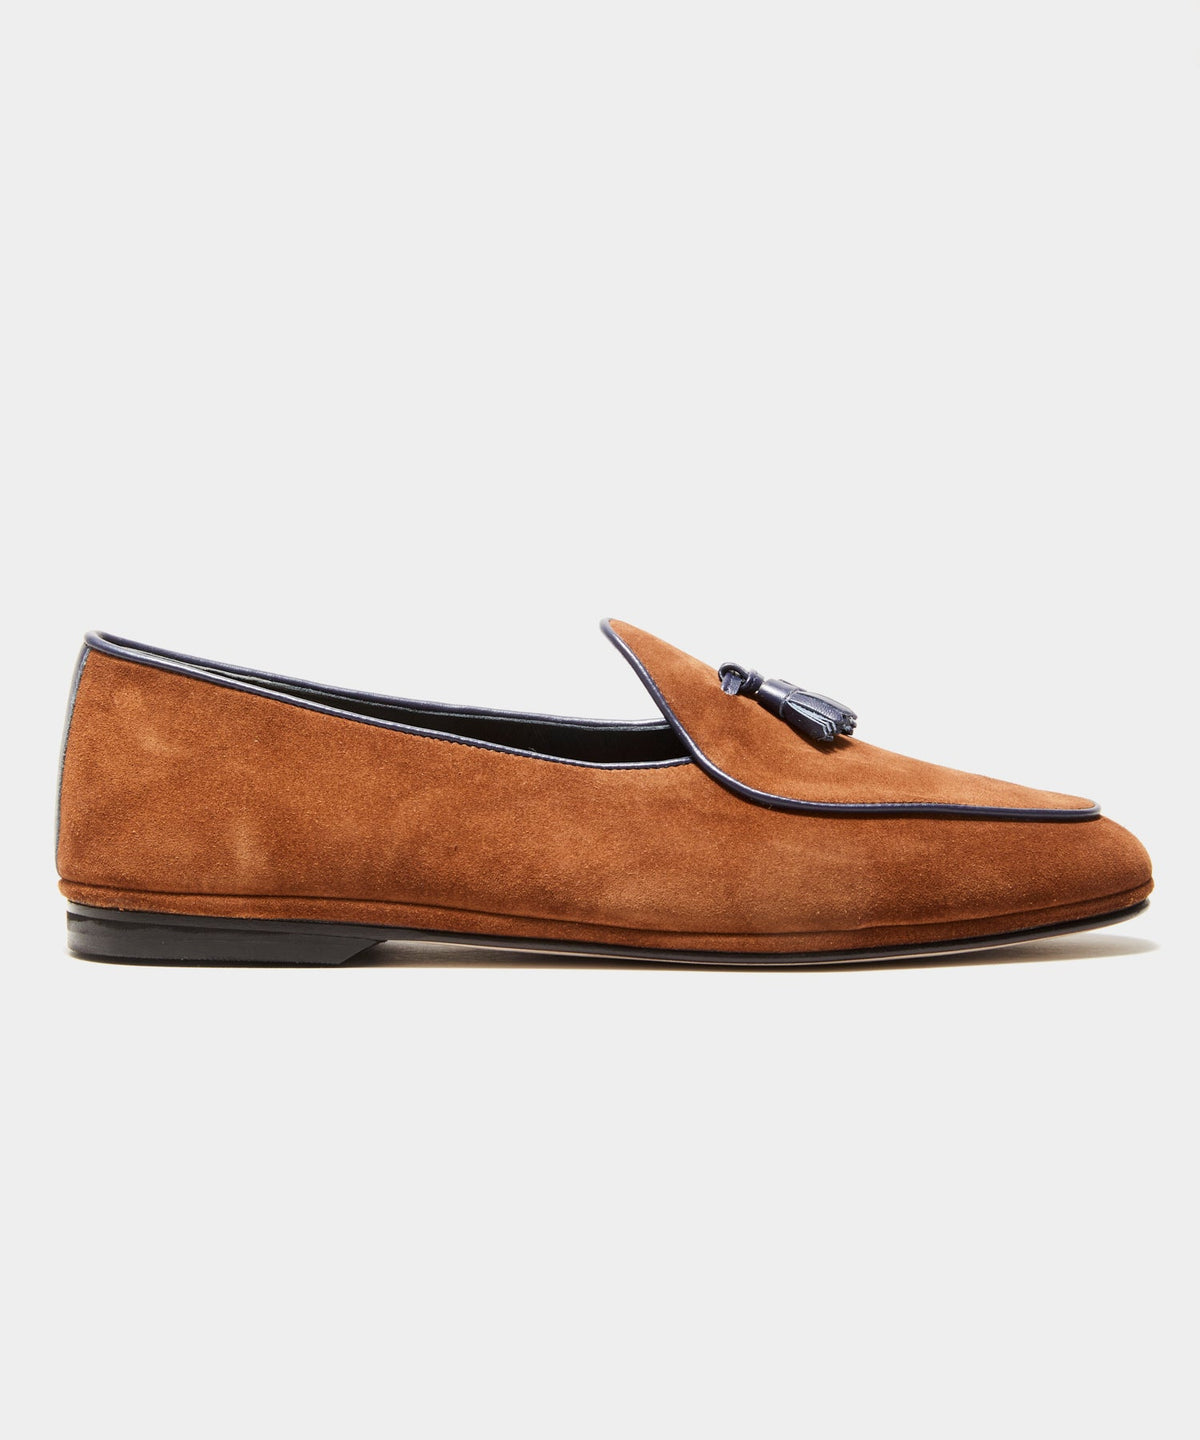 Todd Snyder x Rubinacci Marphy Suede Loafer in Tobacco